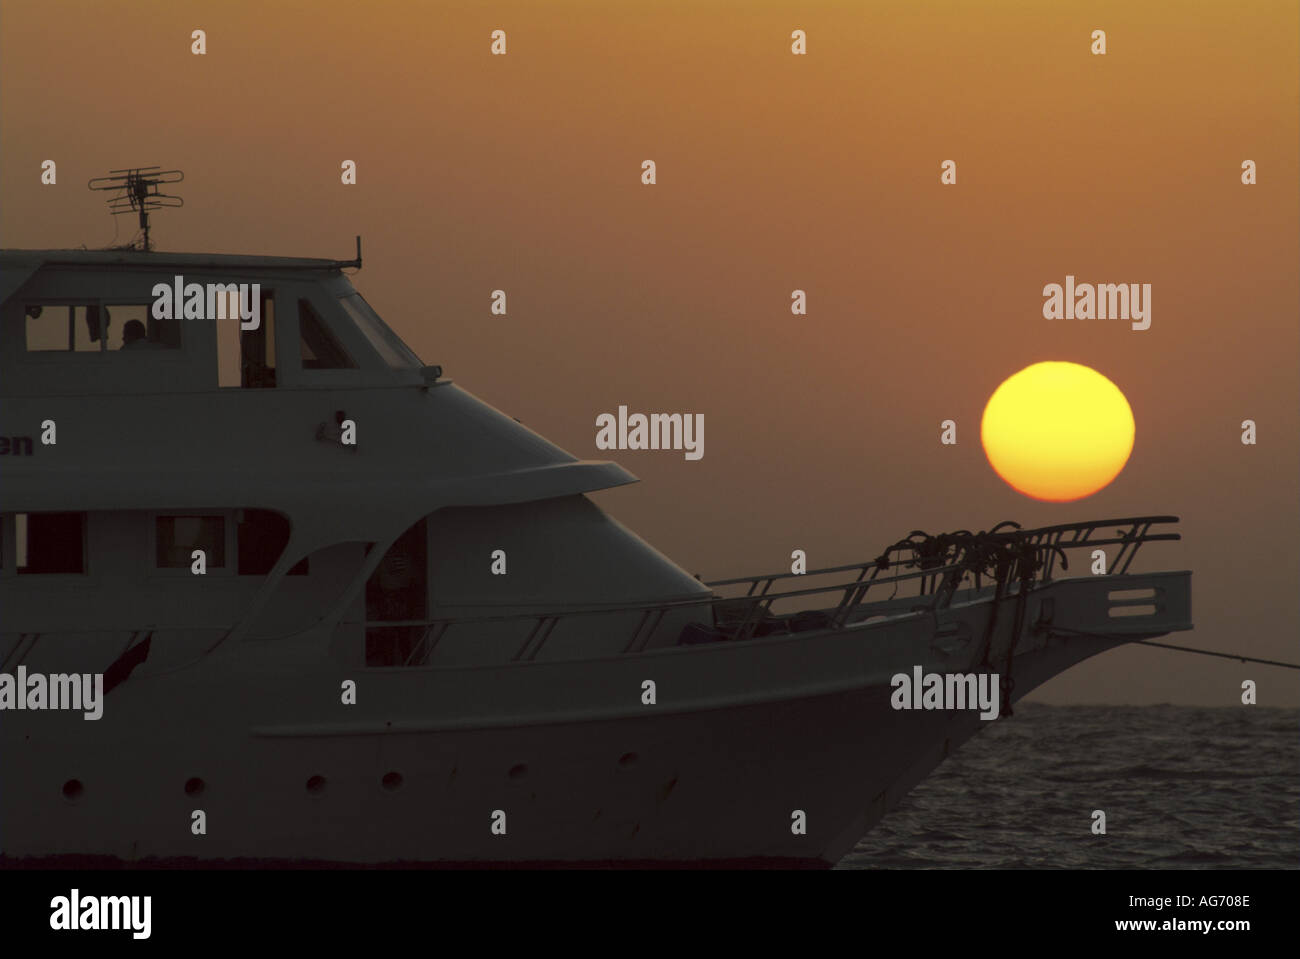 Sunset behind a boat on the Red Sea, Egypt. Stock Photo